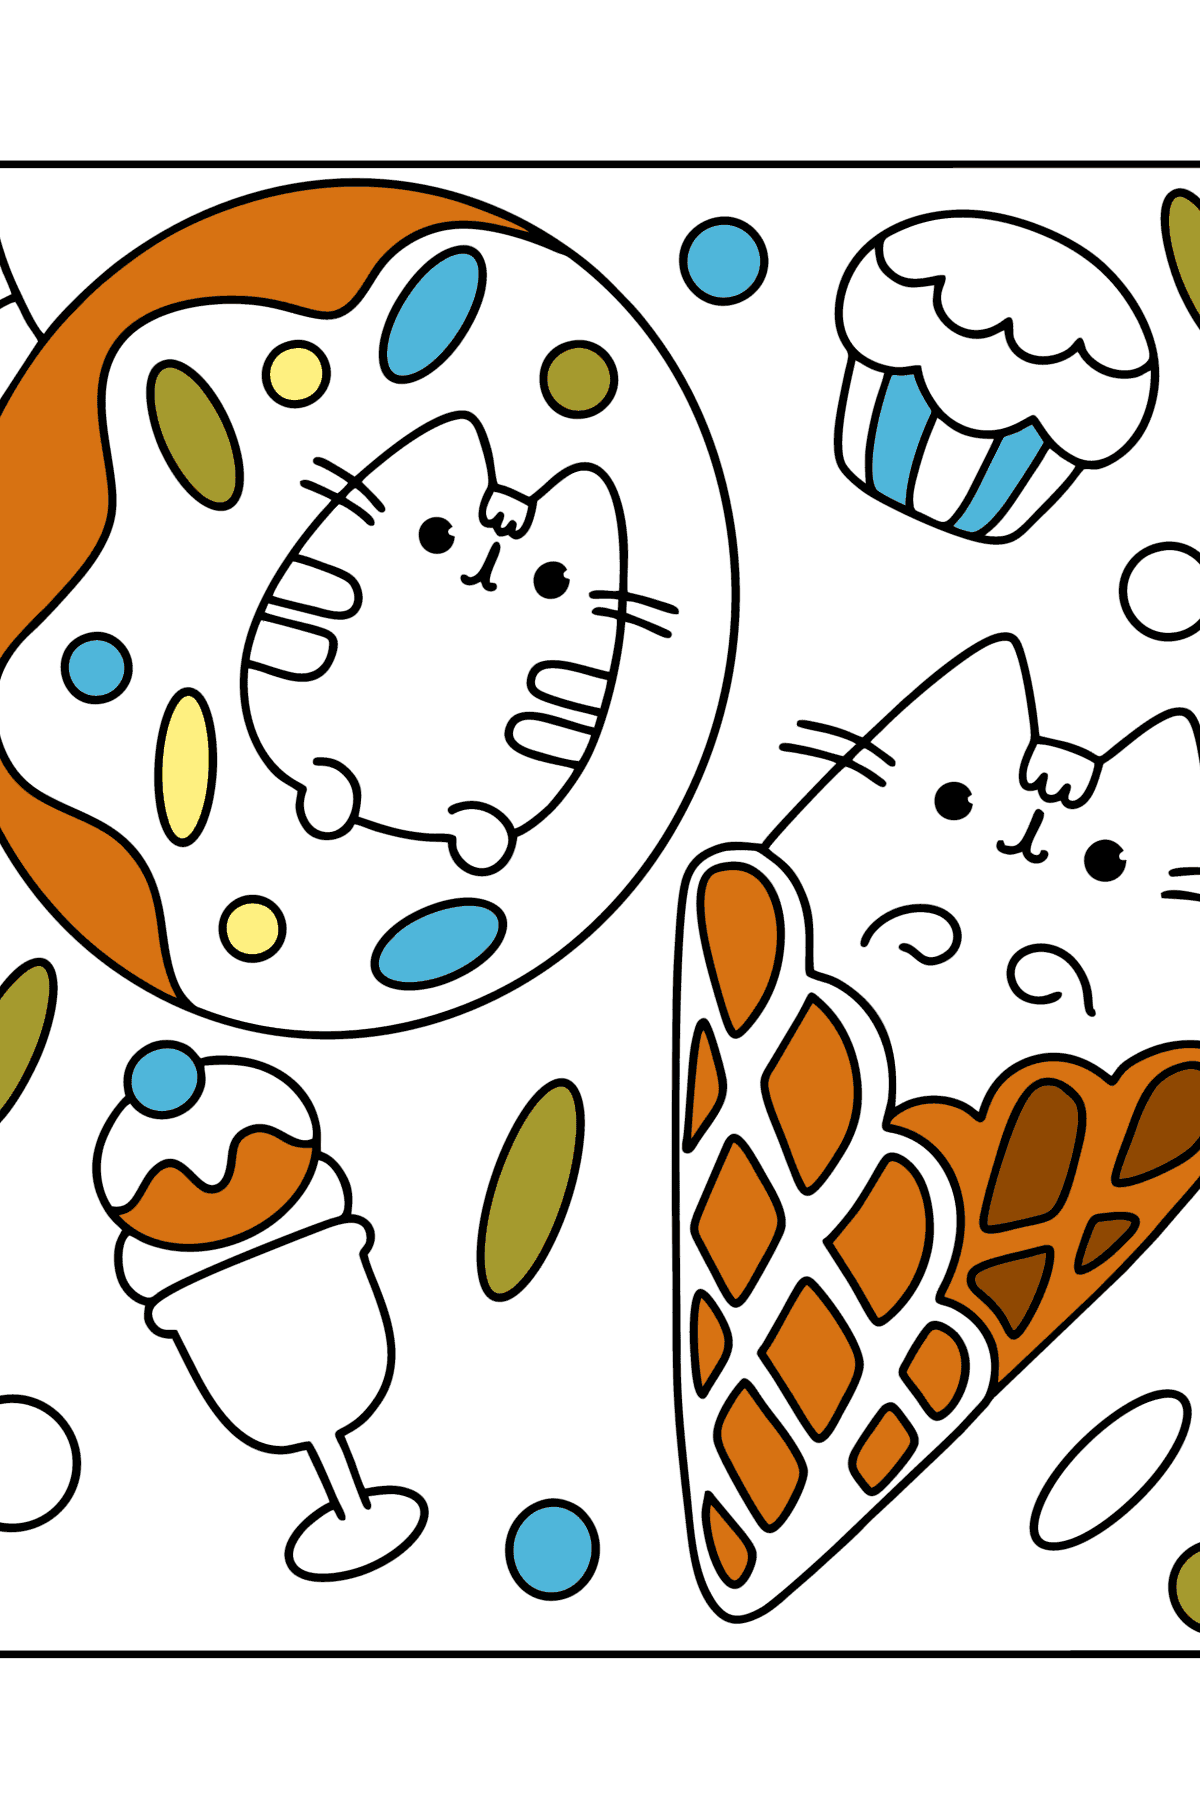 Pusheen sweets сoloring page - Coloring Pages for Kids